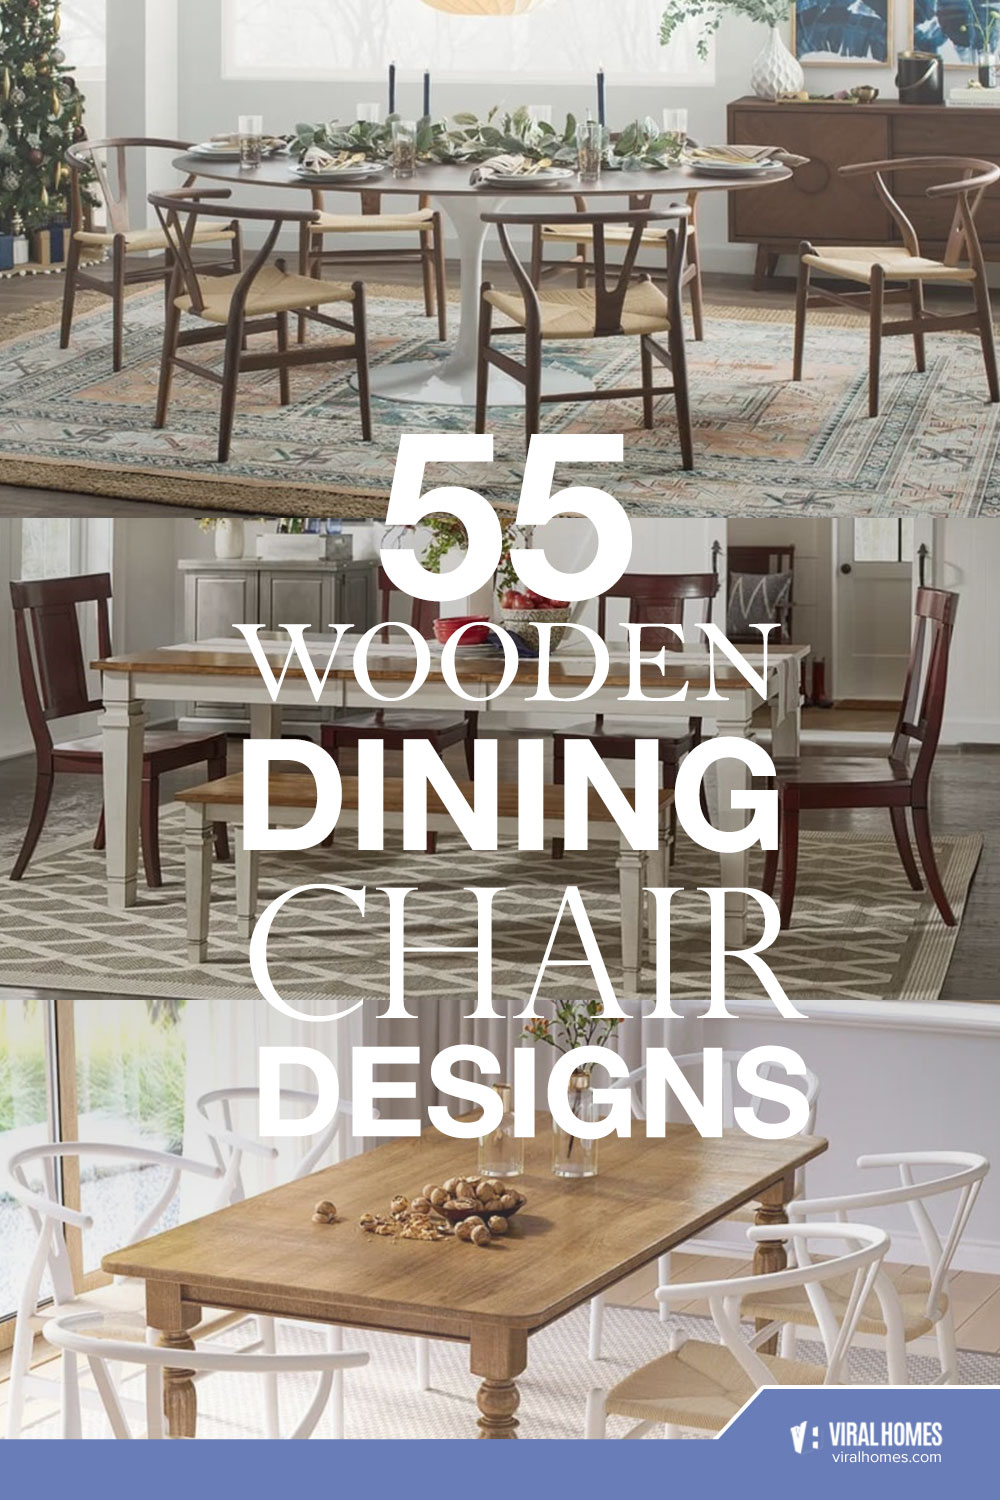 Wooden Dining Chair Designs For a Classy Dining Room